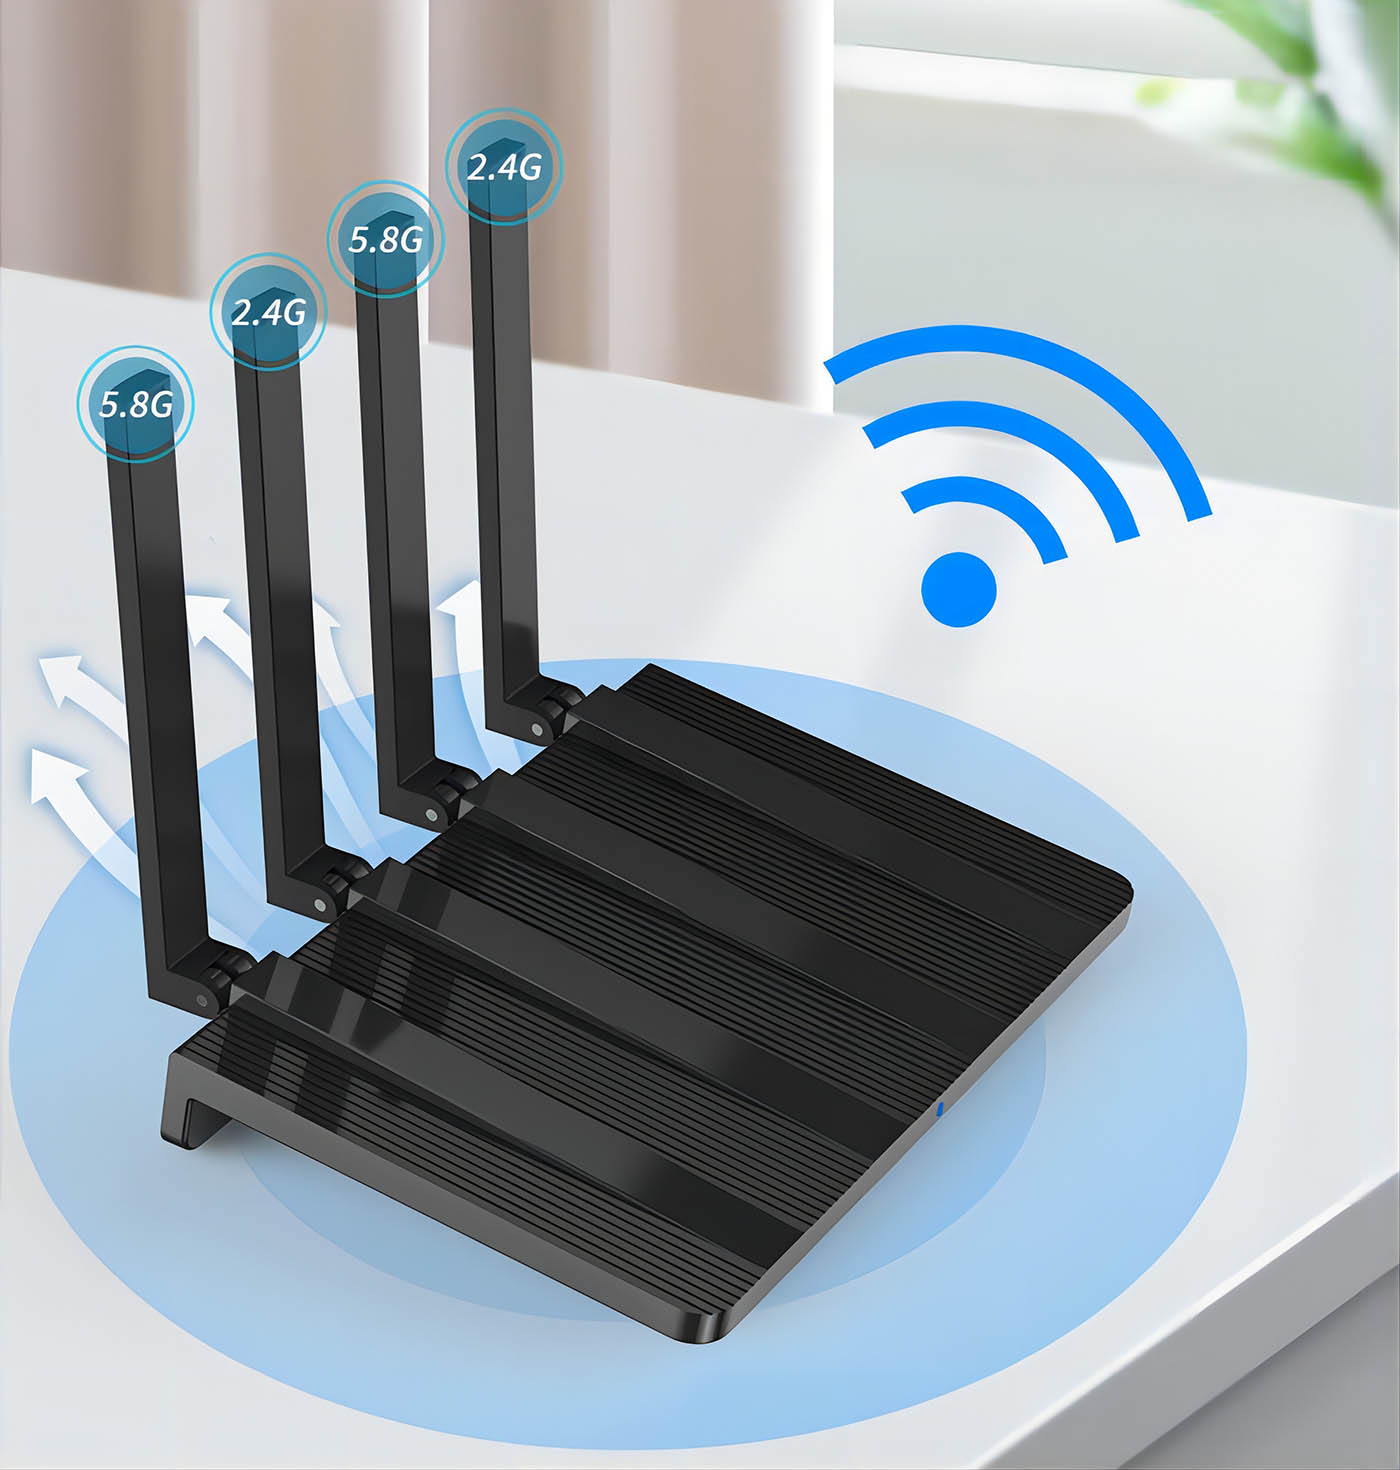 https://www.4gltewifirouter.com/1800mbps-wifi-6-mesh-dual-band-2-4g-5-8g-gigabit-ports-ipq6000-chipset-wireless-routers-usb-3-0-product/